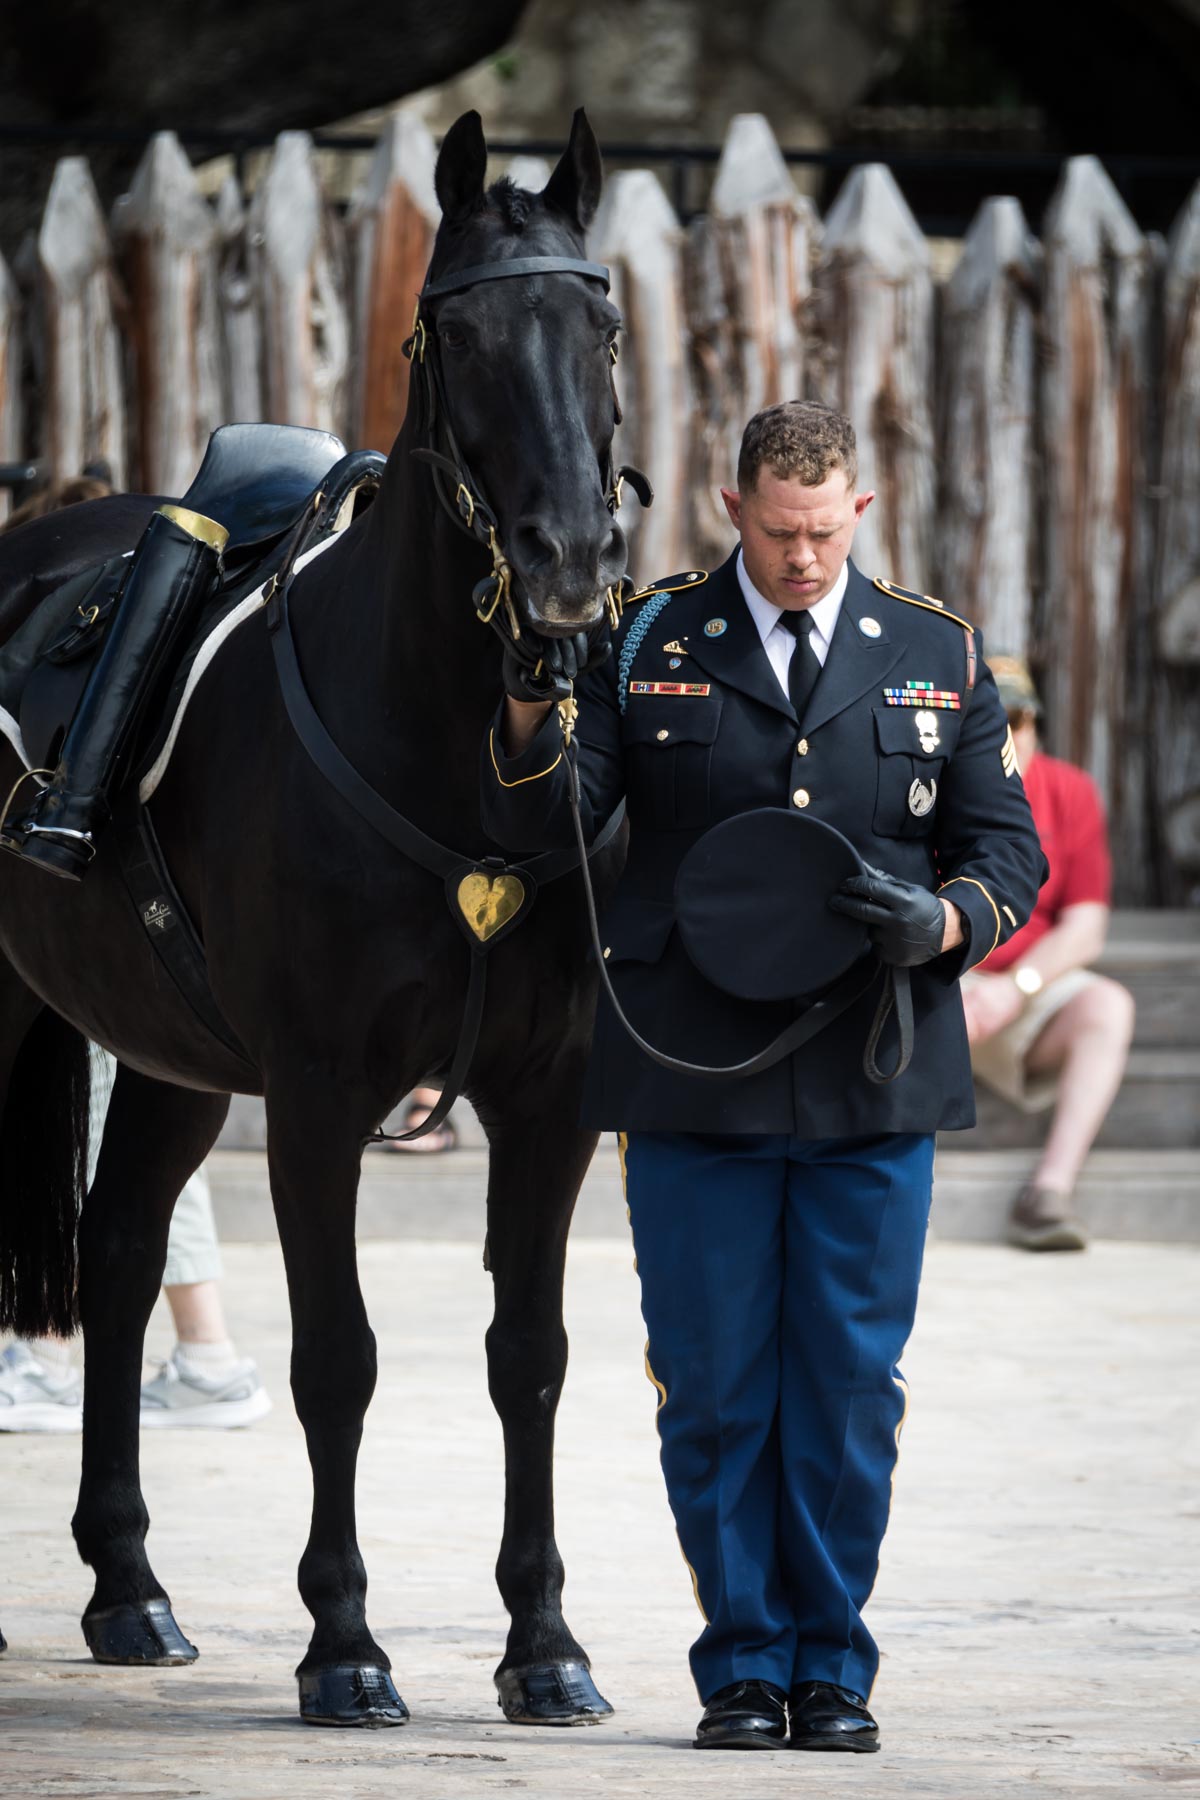 Soldier holding black horse on leash during pilgrimage to Alamo for an article on the best Fiesta photos